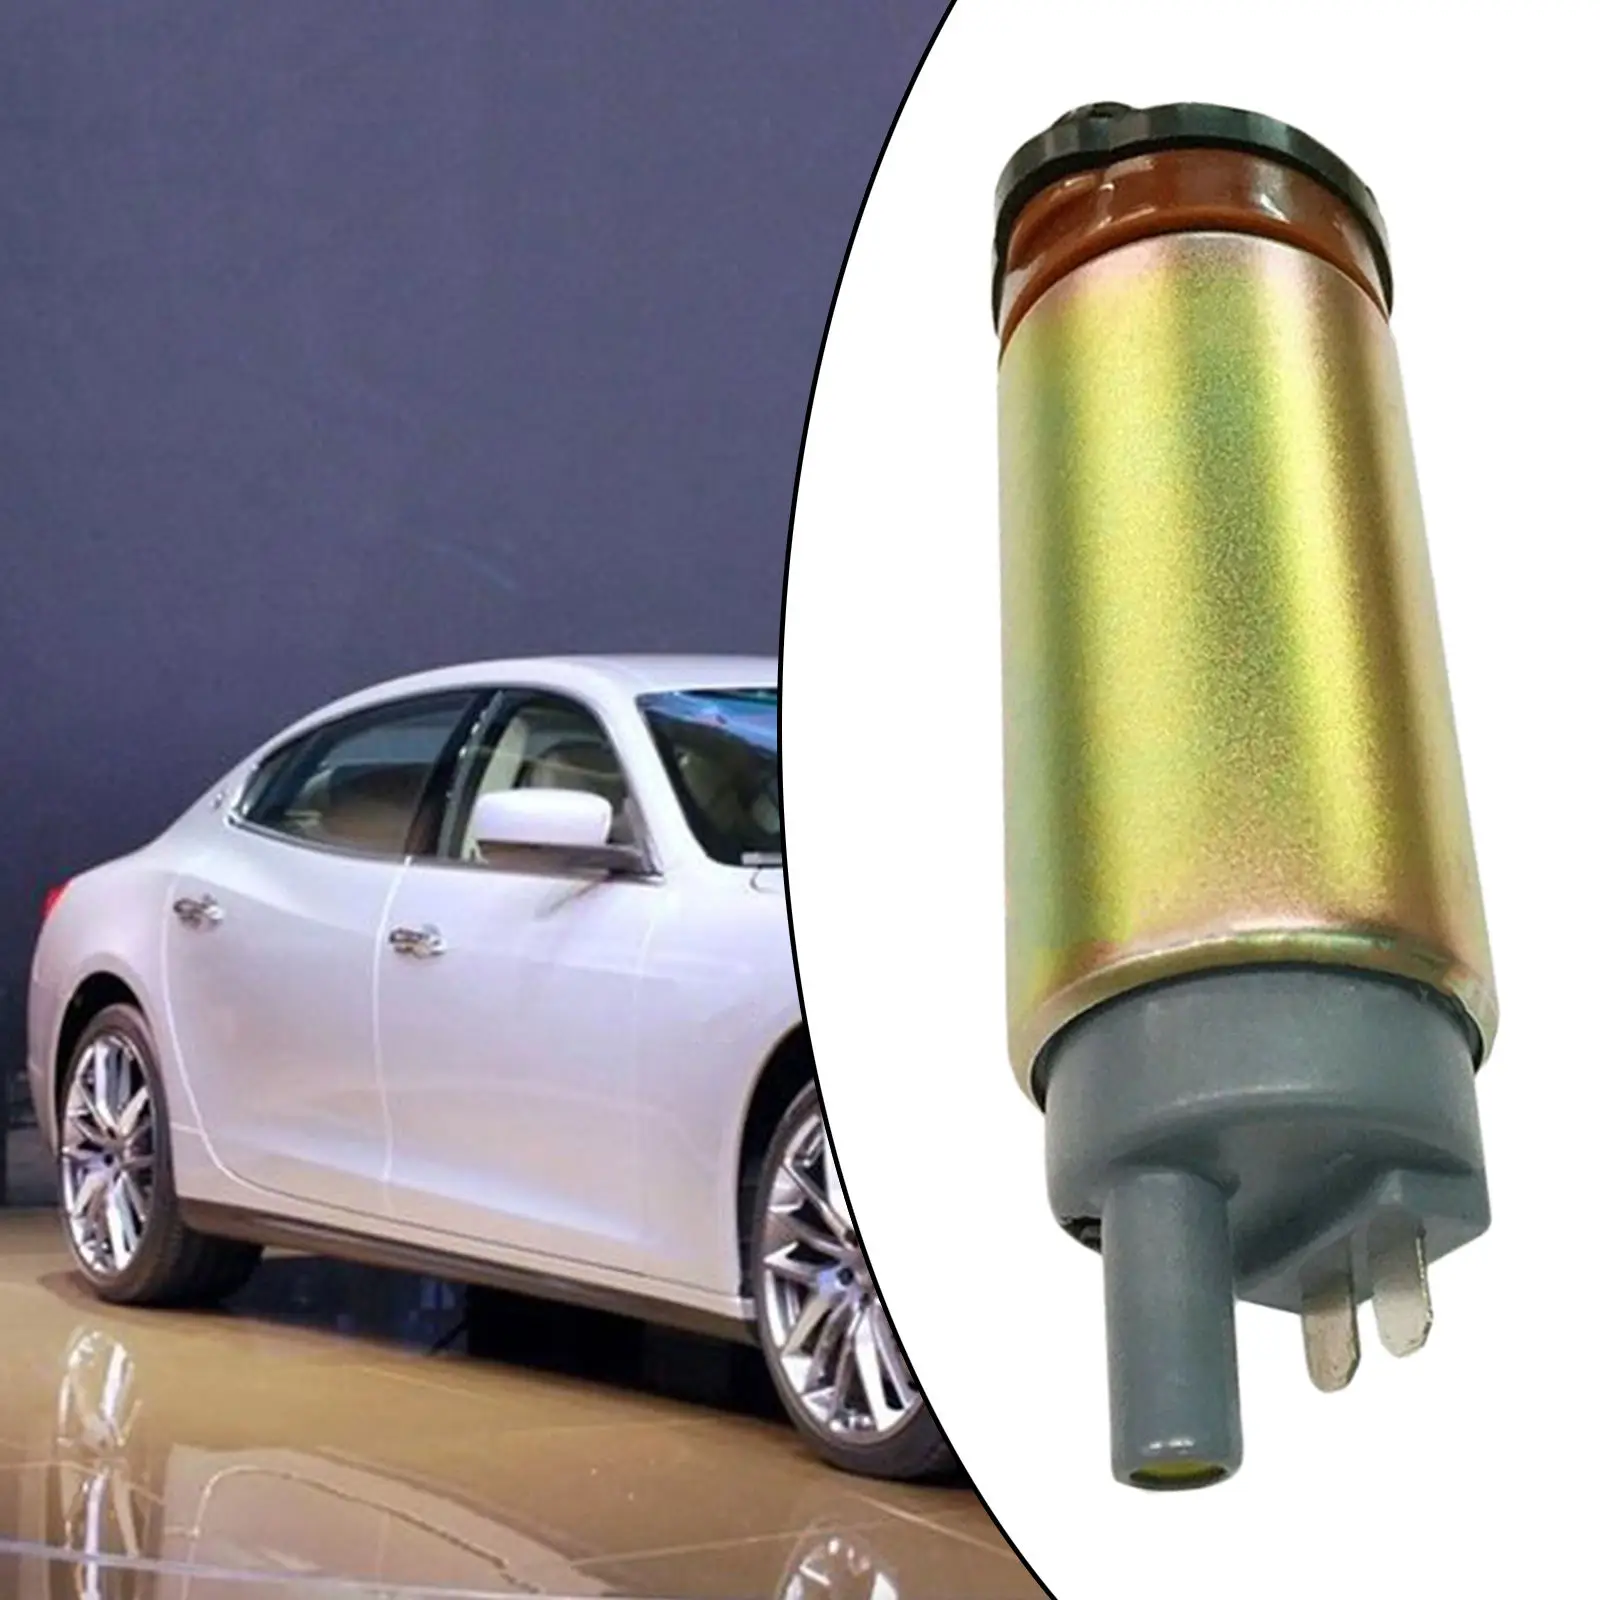 Electric Fuel Transfer Pump Water Oil Transfer Refueling Submersible Pump for Water Pump Automobile